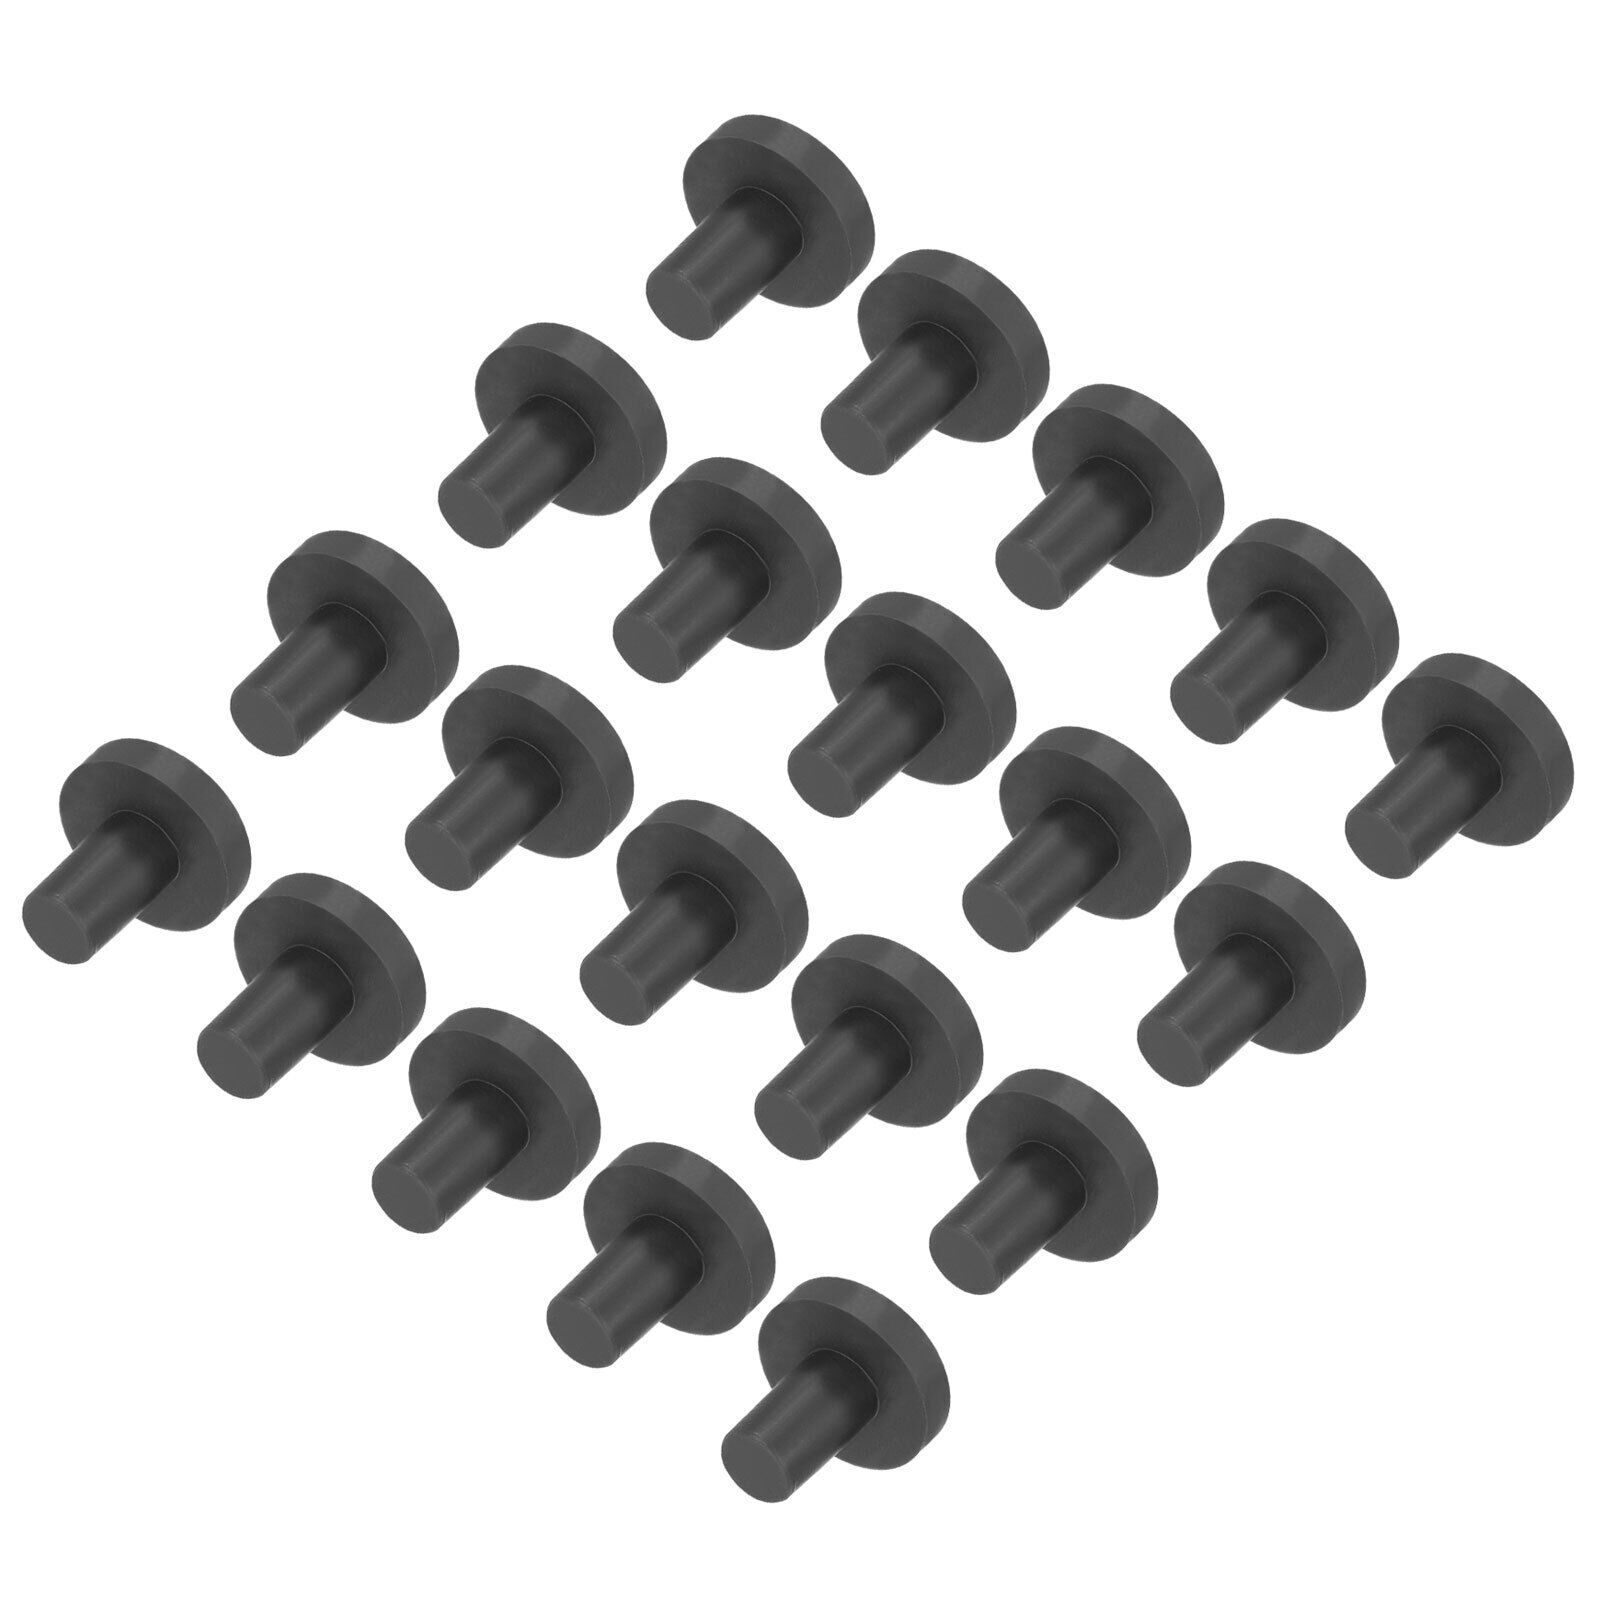 20pcs High Temp Silicone Plug Mount 4mm T Shaped Solid Rubber Stopper Hole Plugs